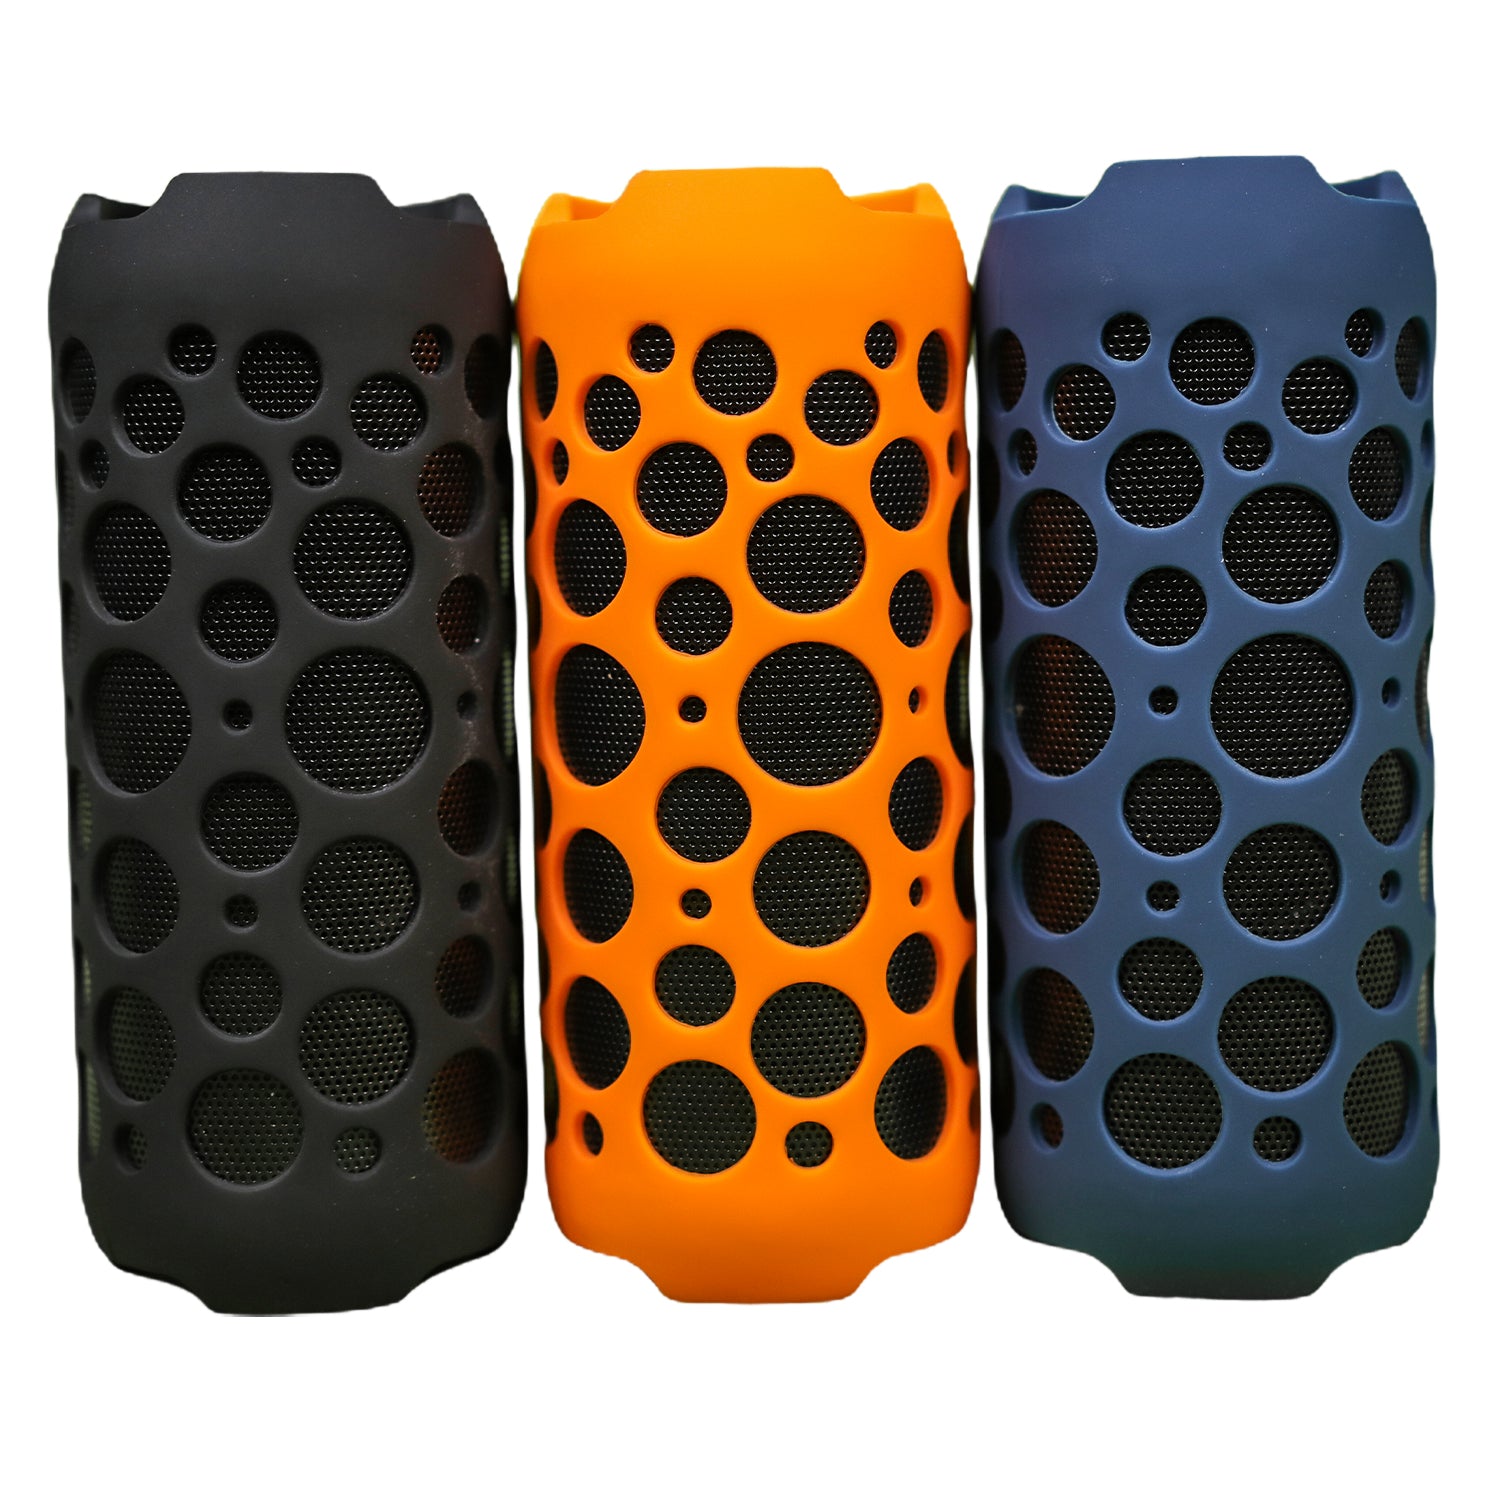 BEME Turtle Dual Functionality Wireless Speaker and Earbuds